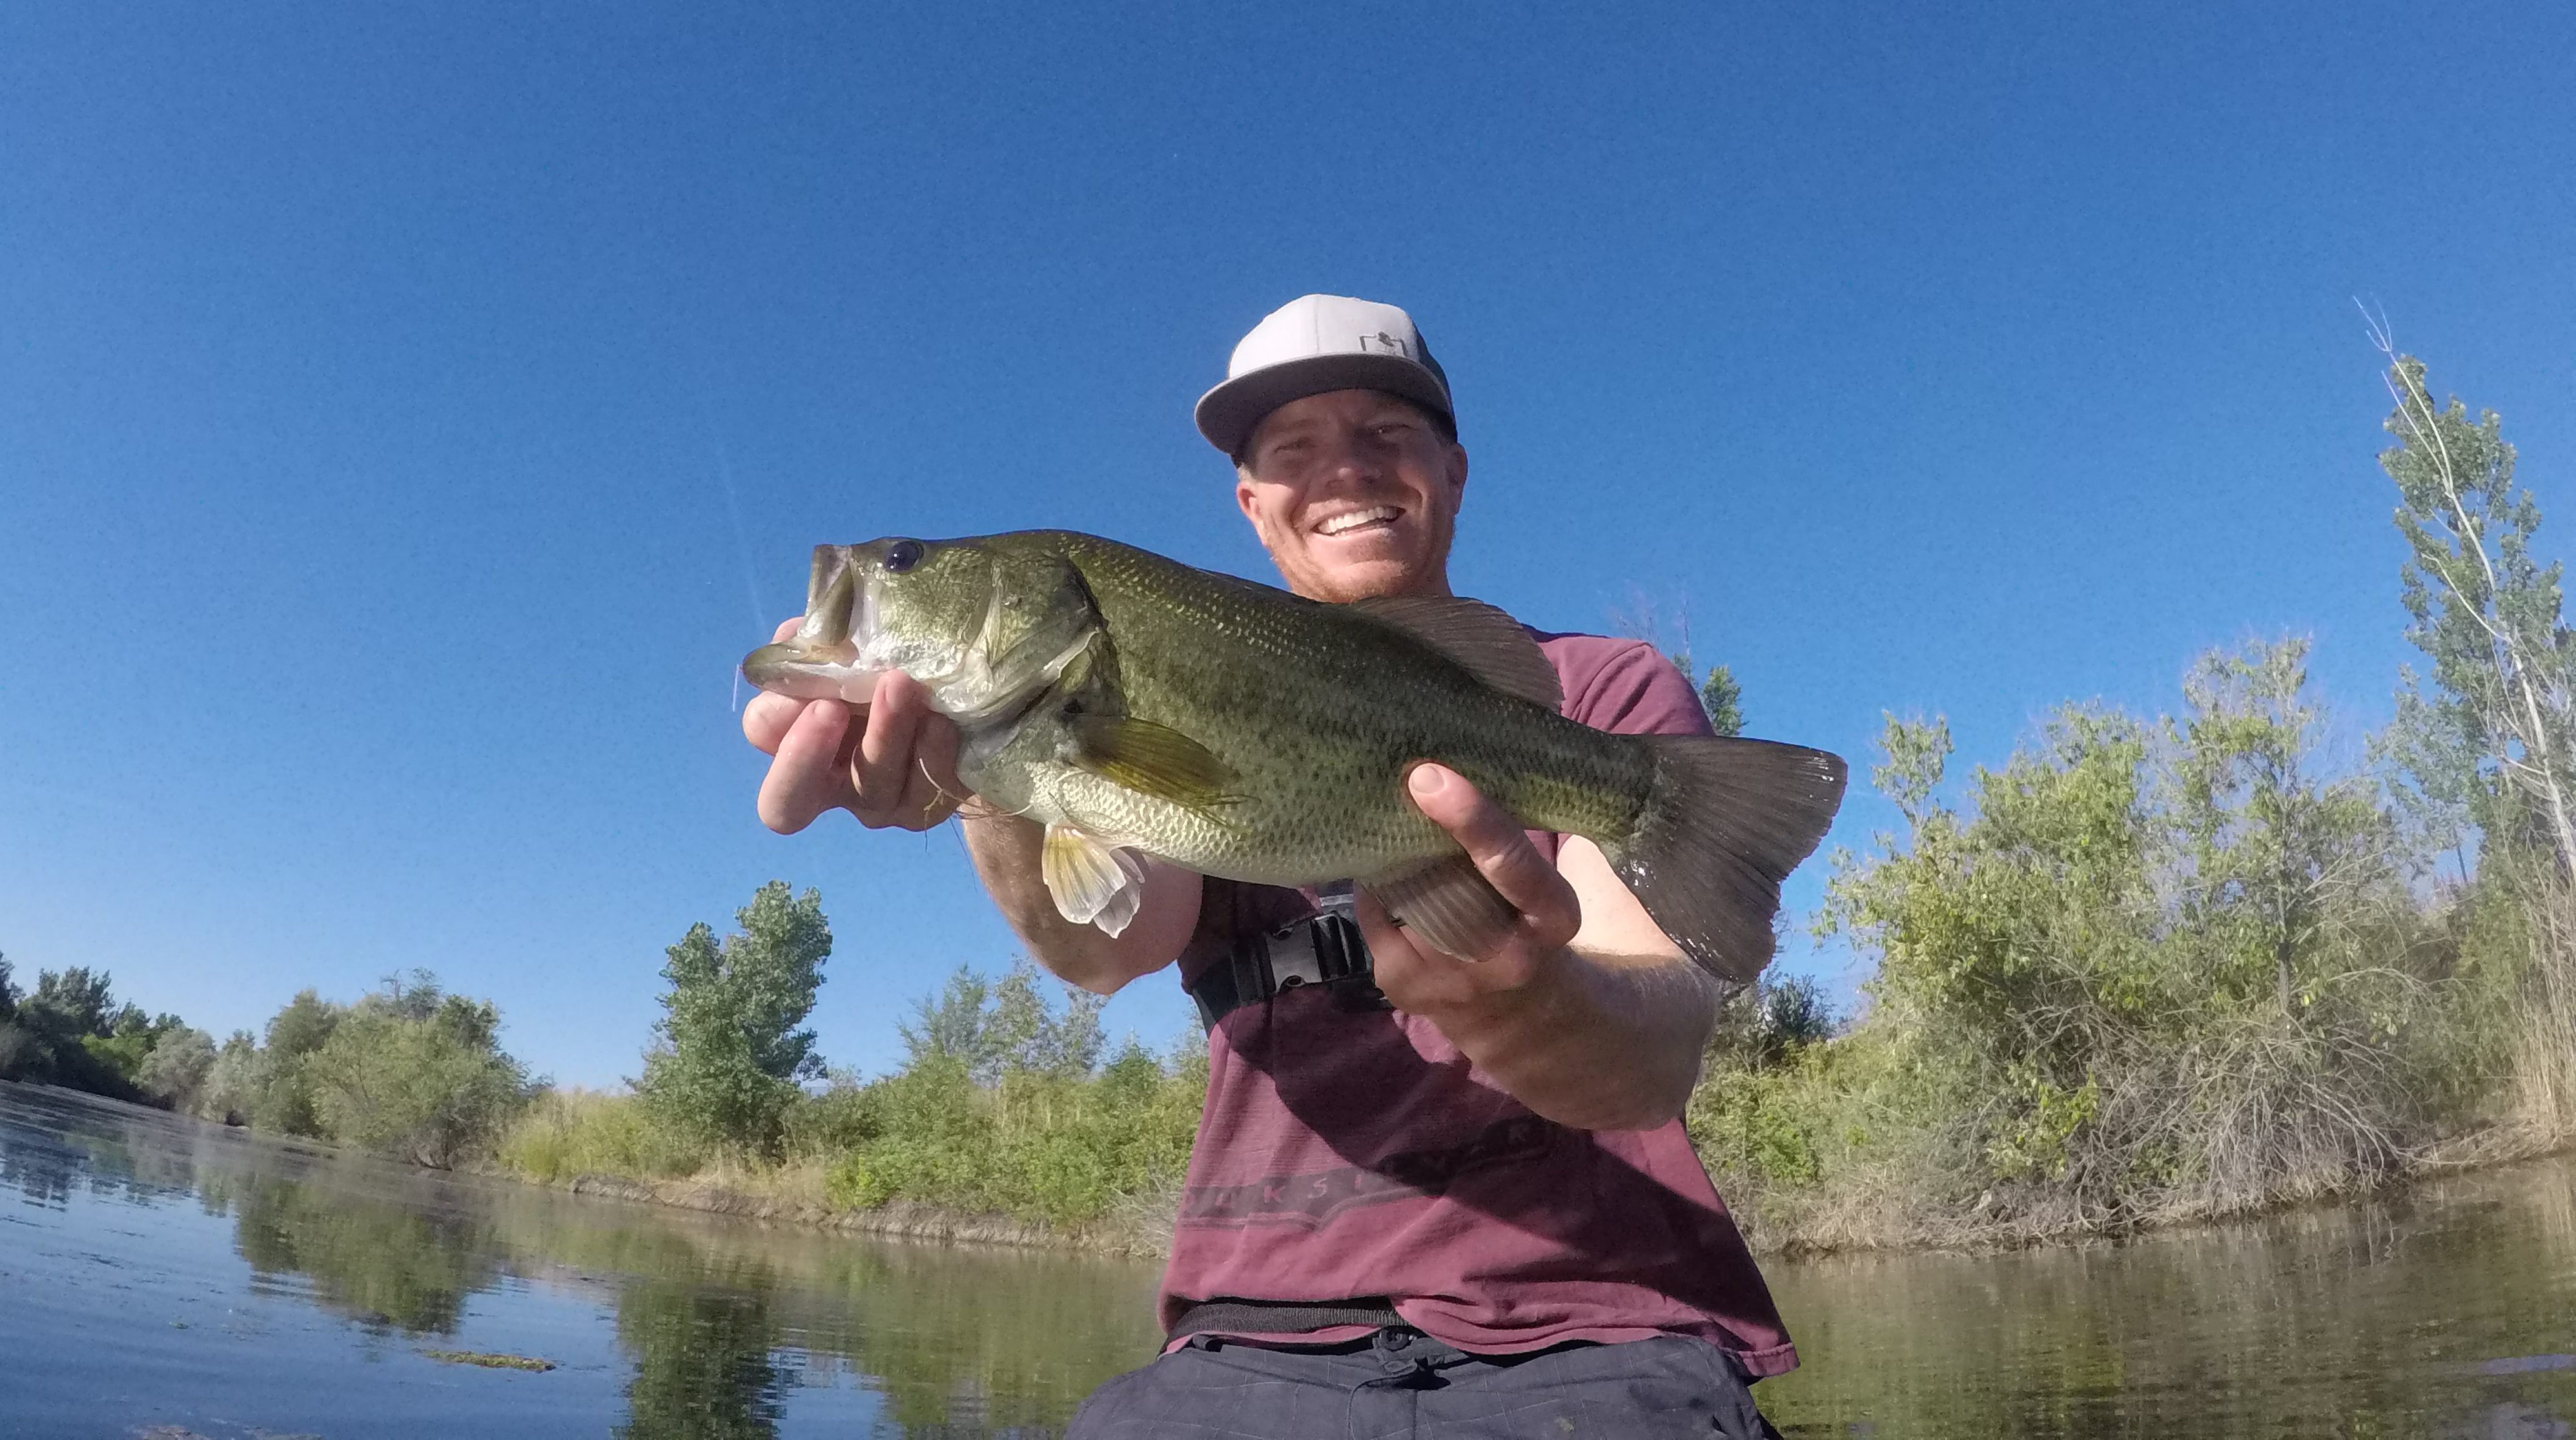 Most Useful Articles & Tips to Help You Catch More Big Bass